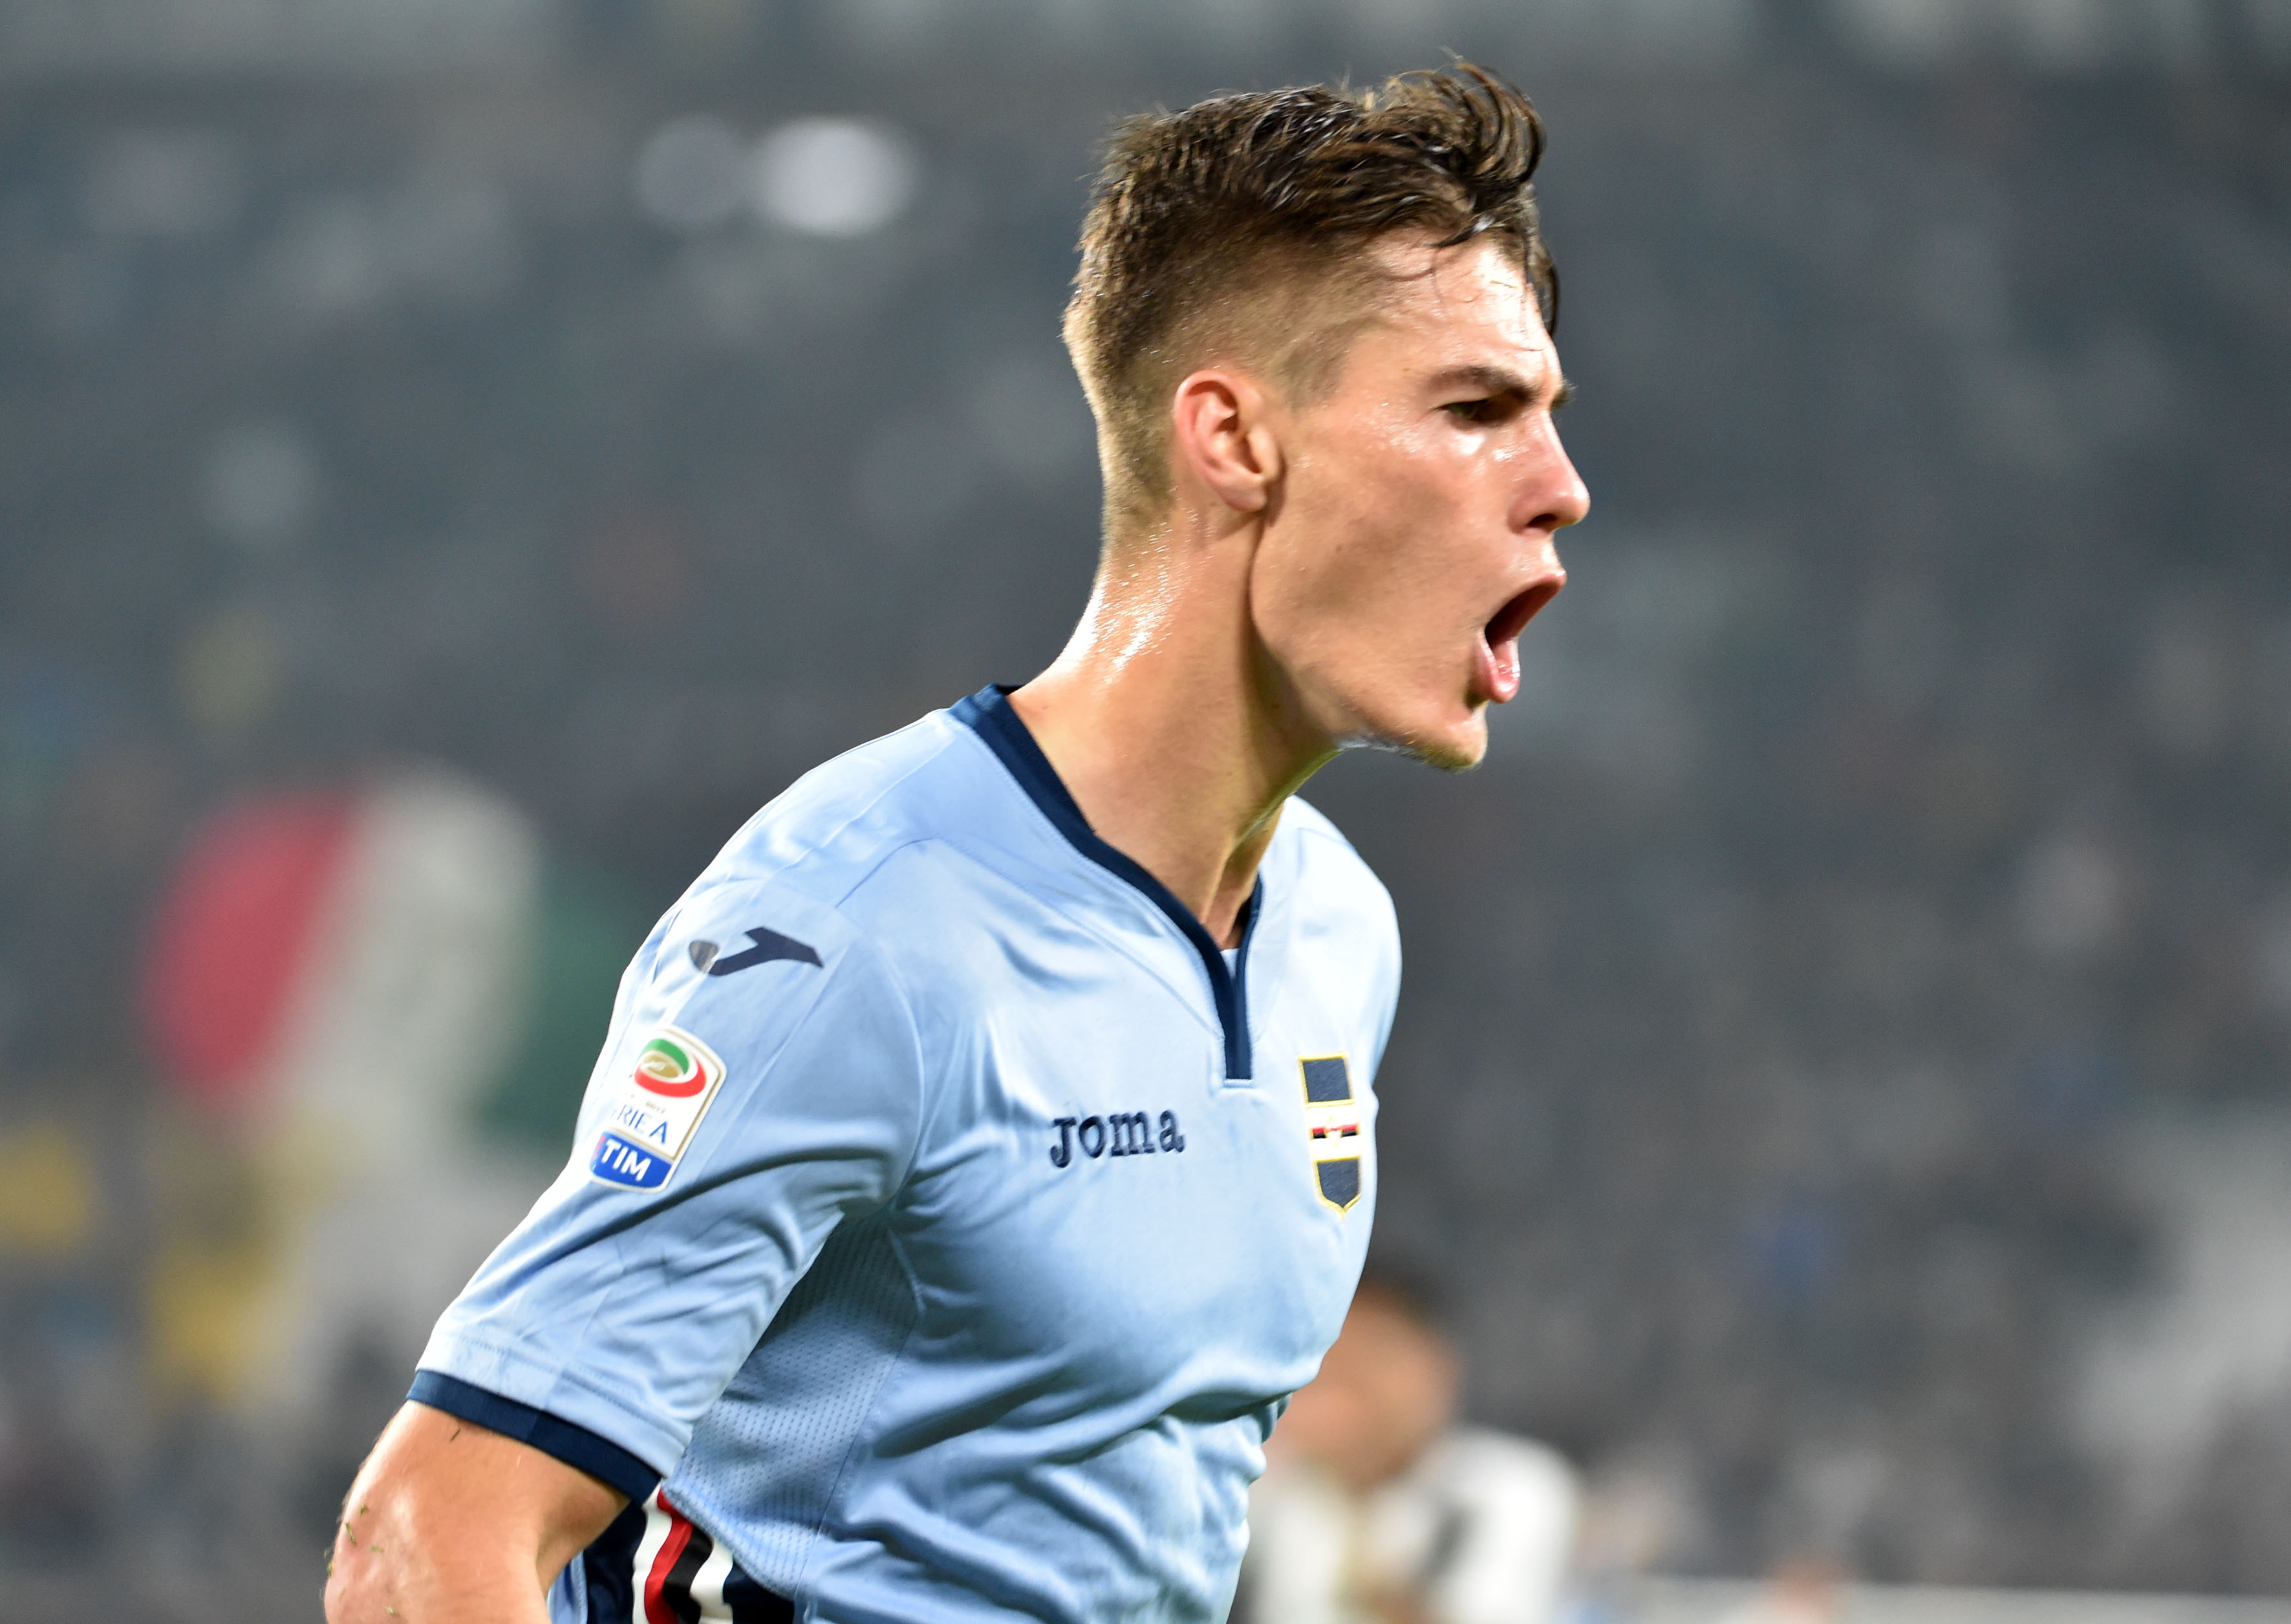 CdS: Inter will examine Schick in tomorrow’s game